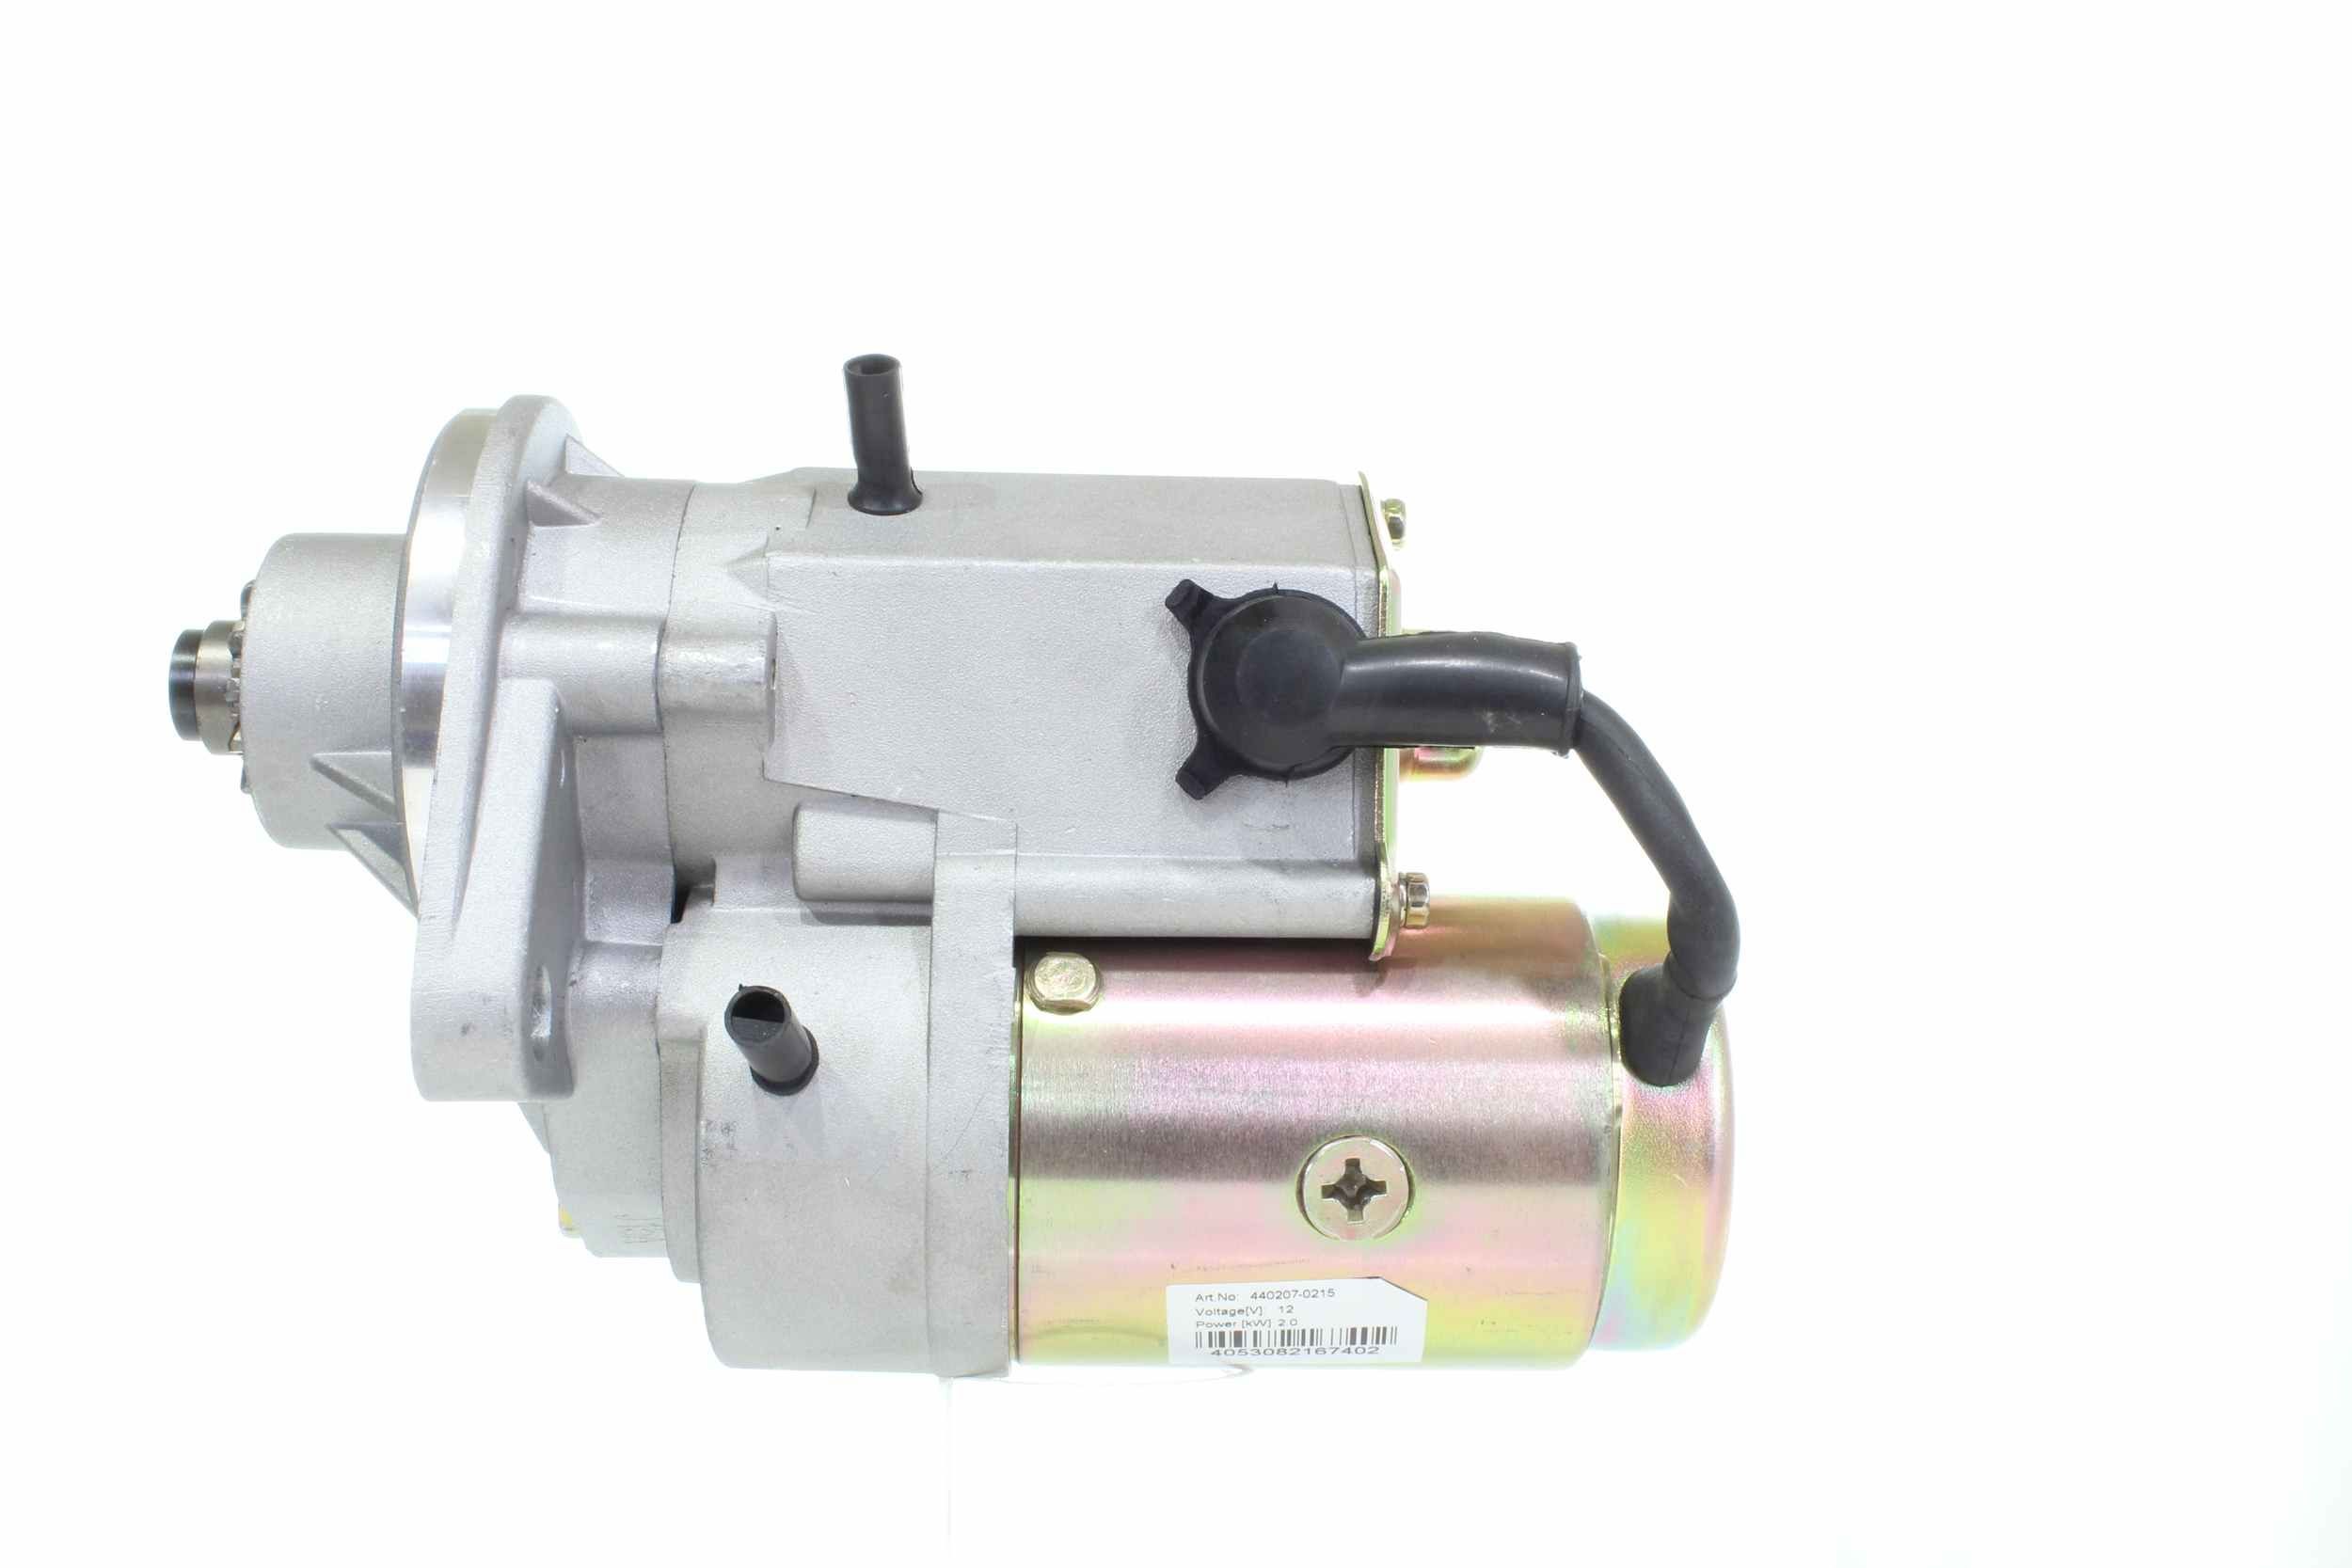 10440207 Engine starter motor ALANKO 103343 review and test